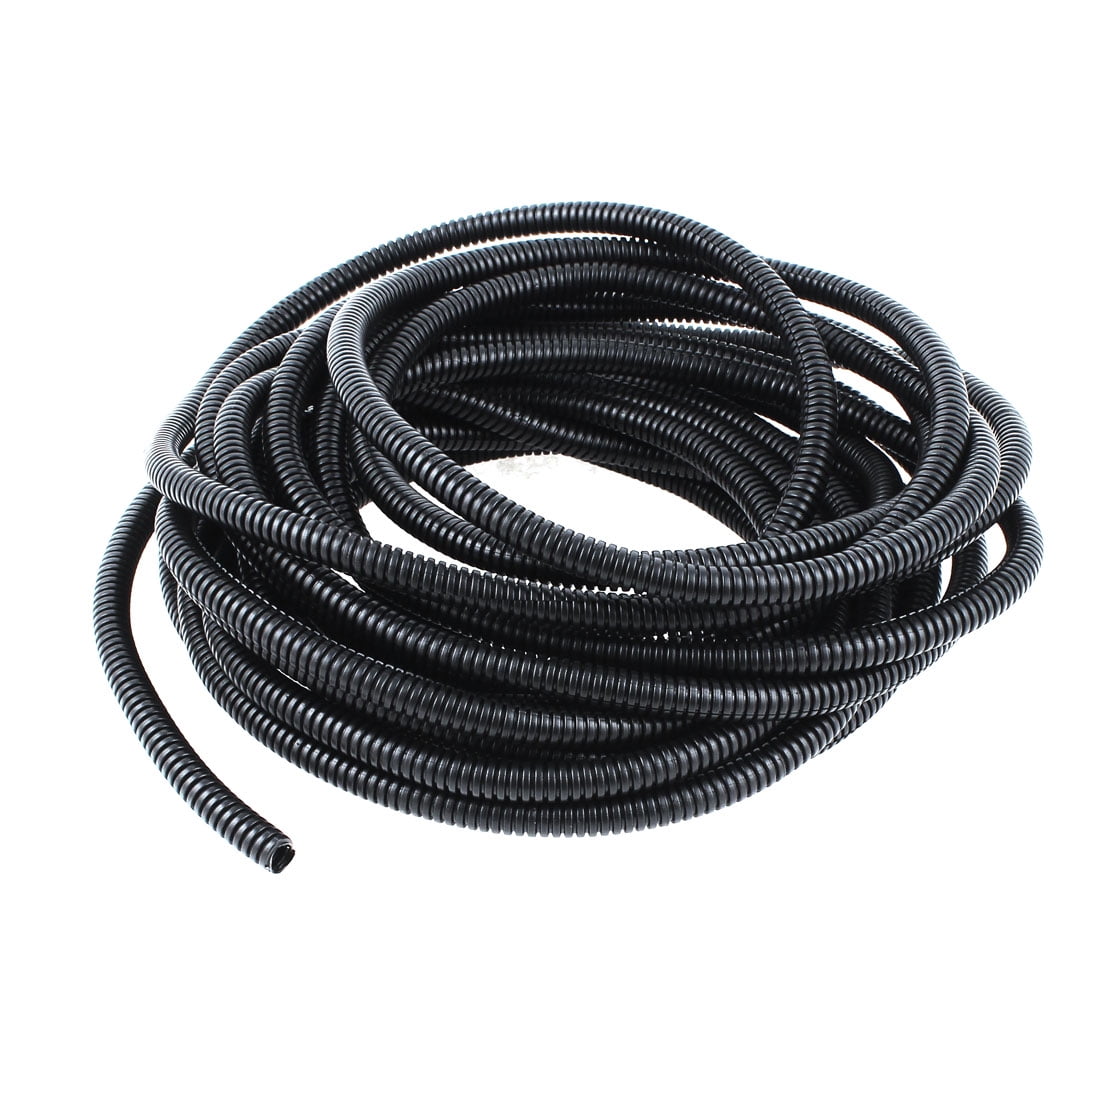 MM 1 1/2" x 50' Non Kink Corrugated Pond Tubing for Water Garden & Koi Ponds 